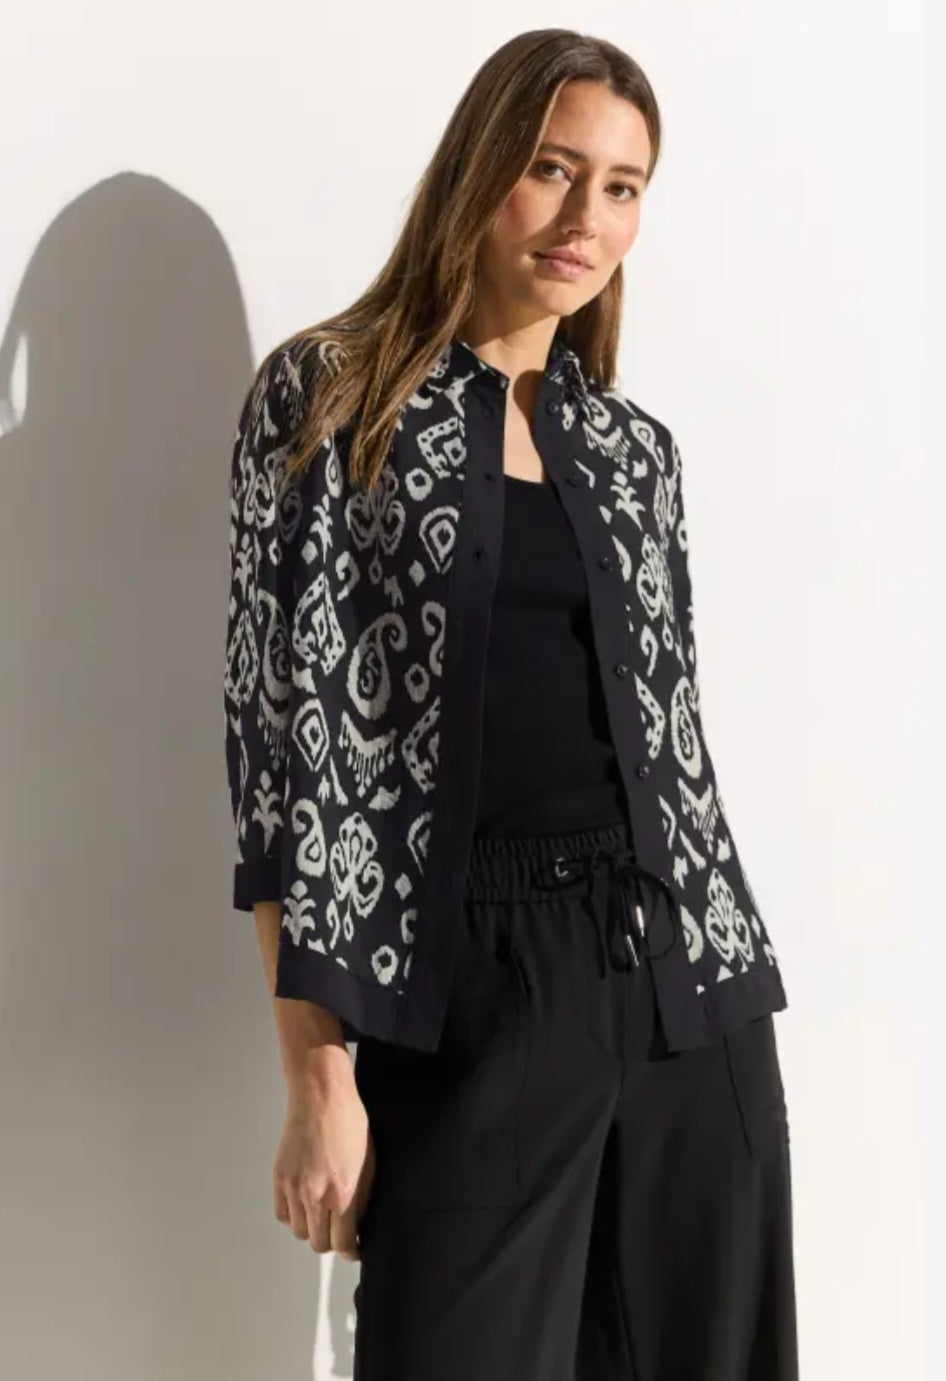 CECIL Black and White Print Blouse